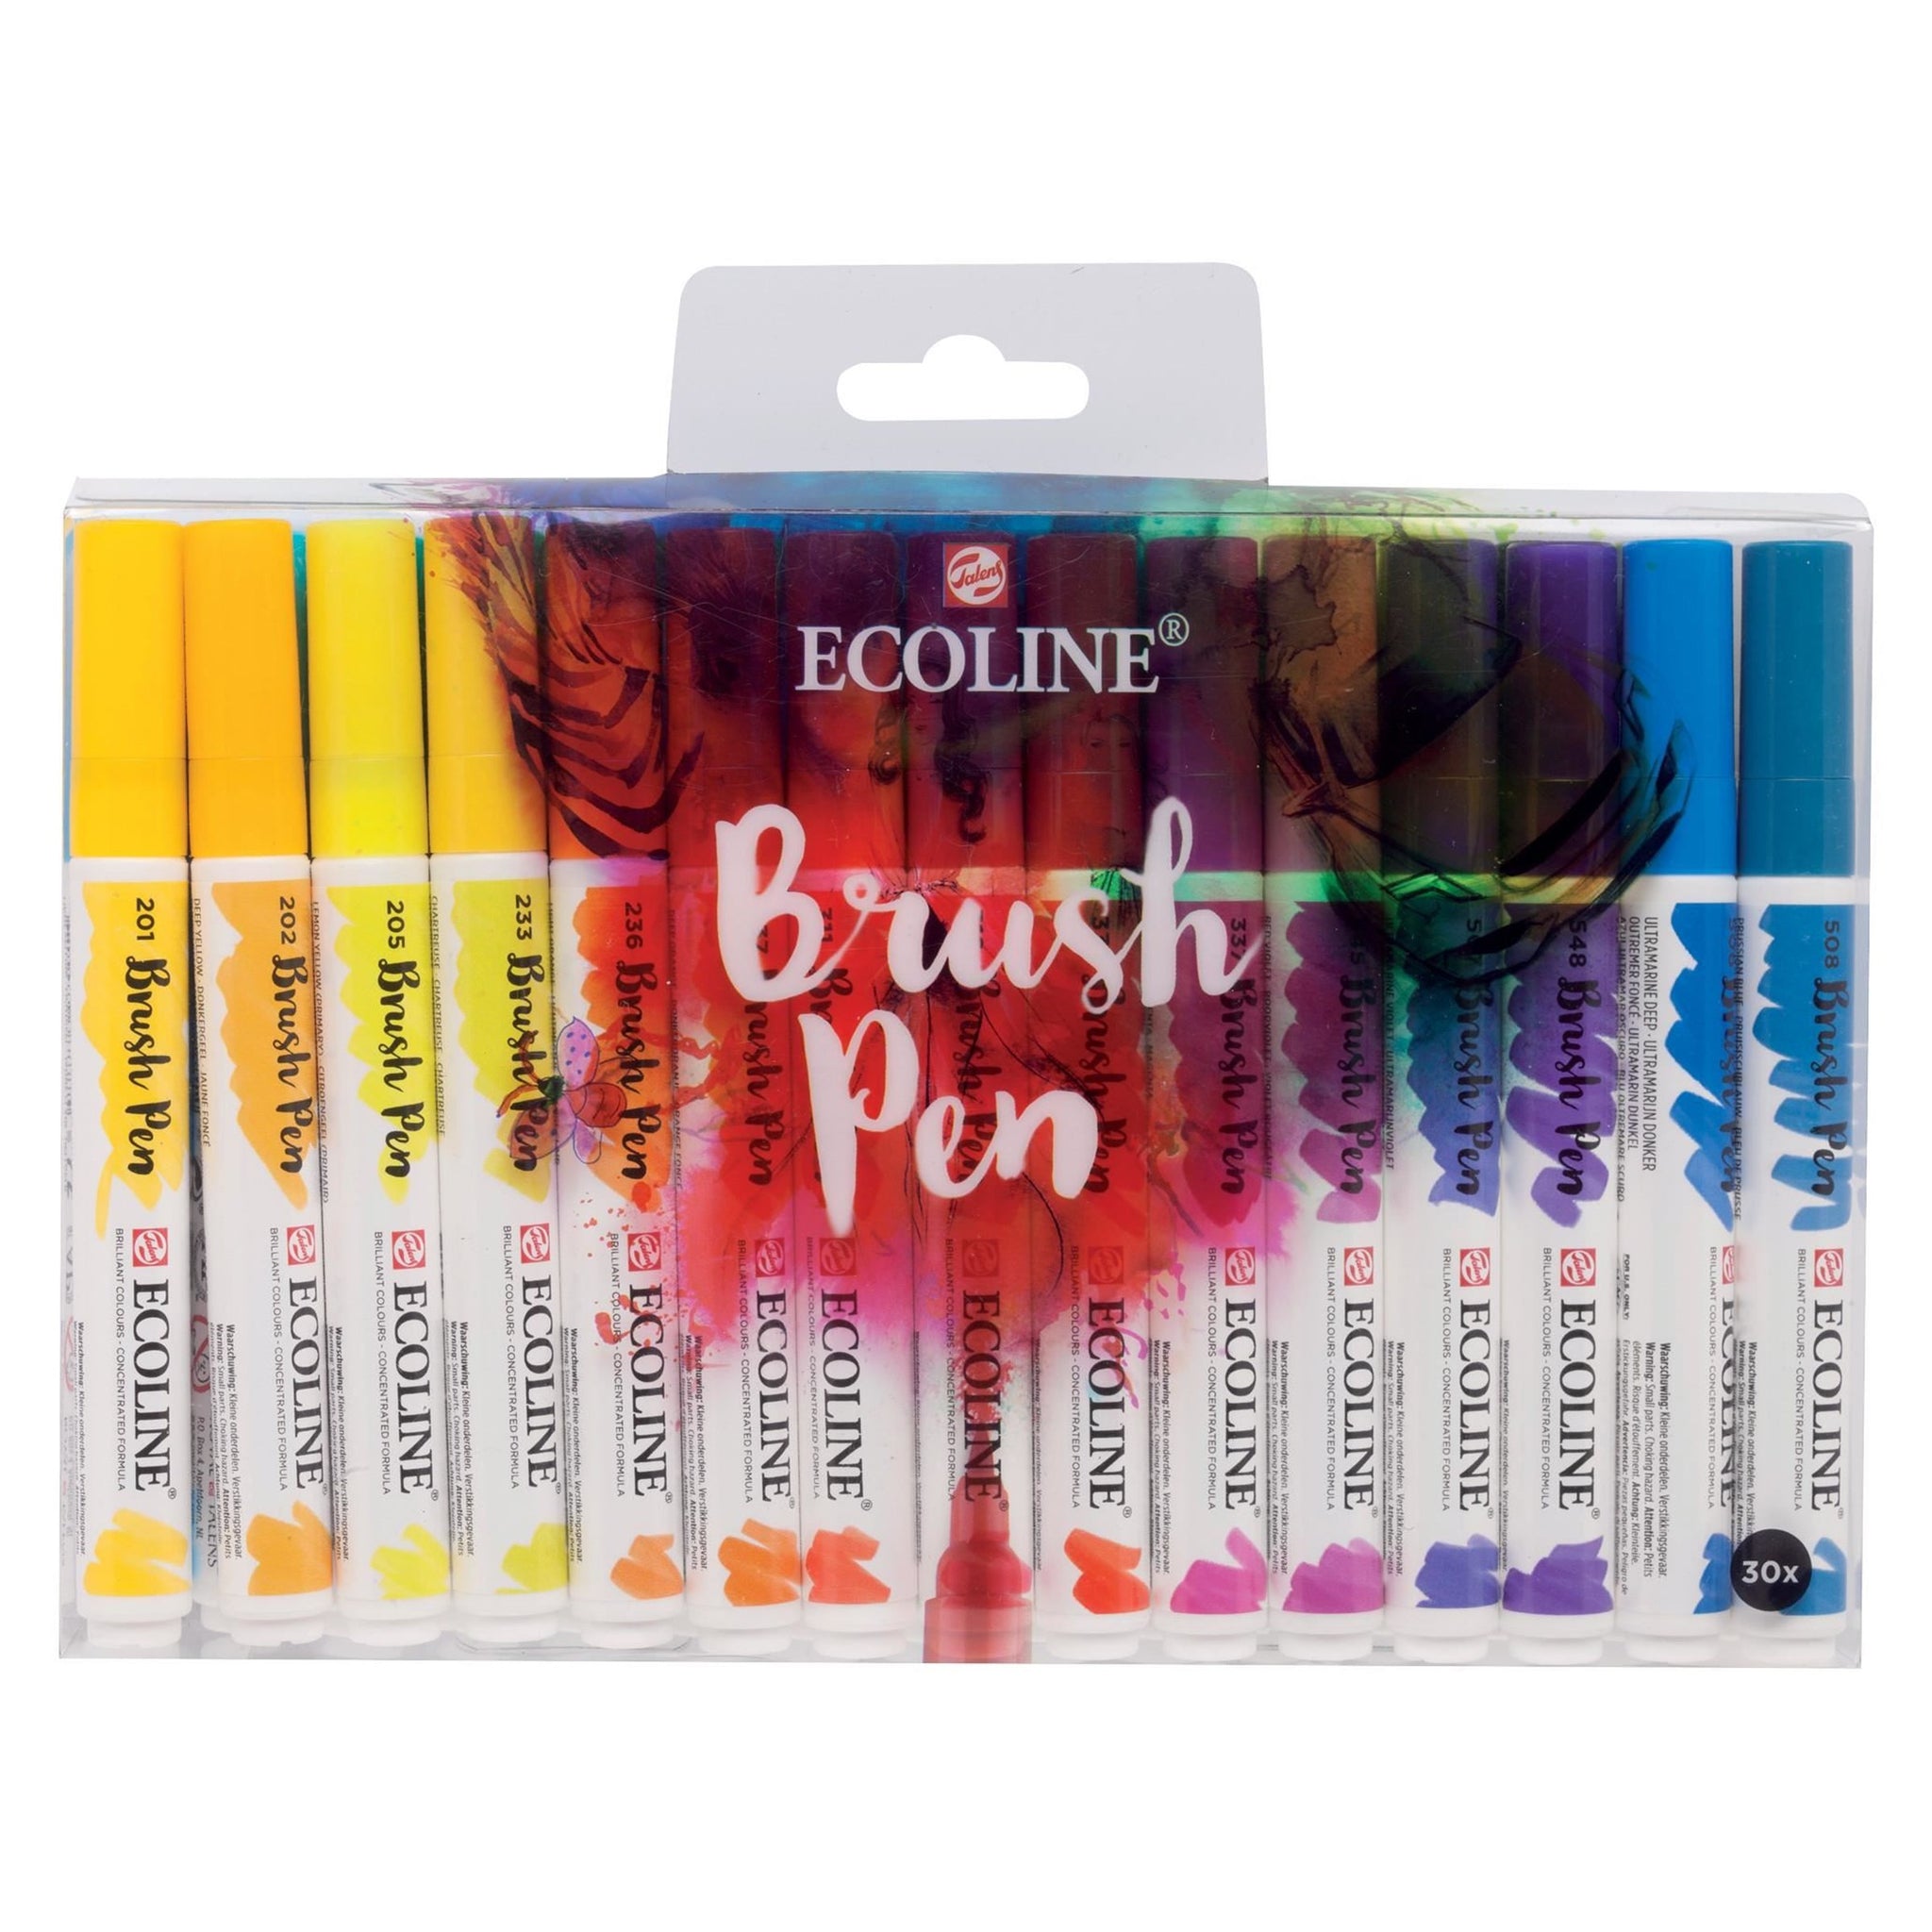 Sleutel Verblinding Abstractie Royal Talens Ecoline Watercolor Brush Pen, Basic Shades, Set of 30 – ARCH  Art Supplies